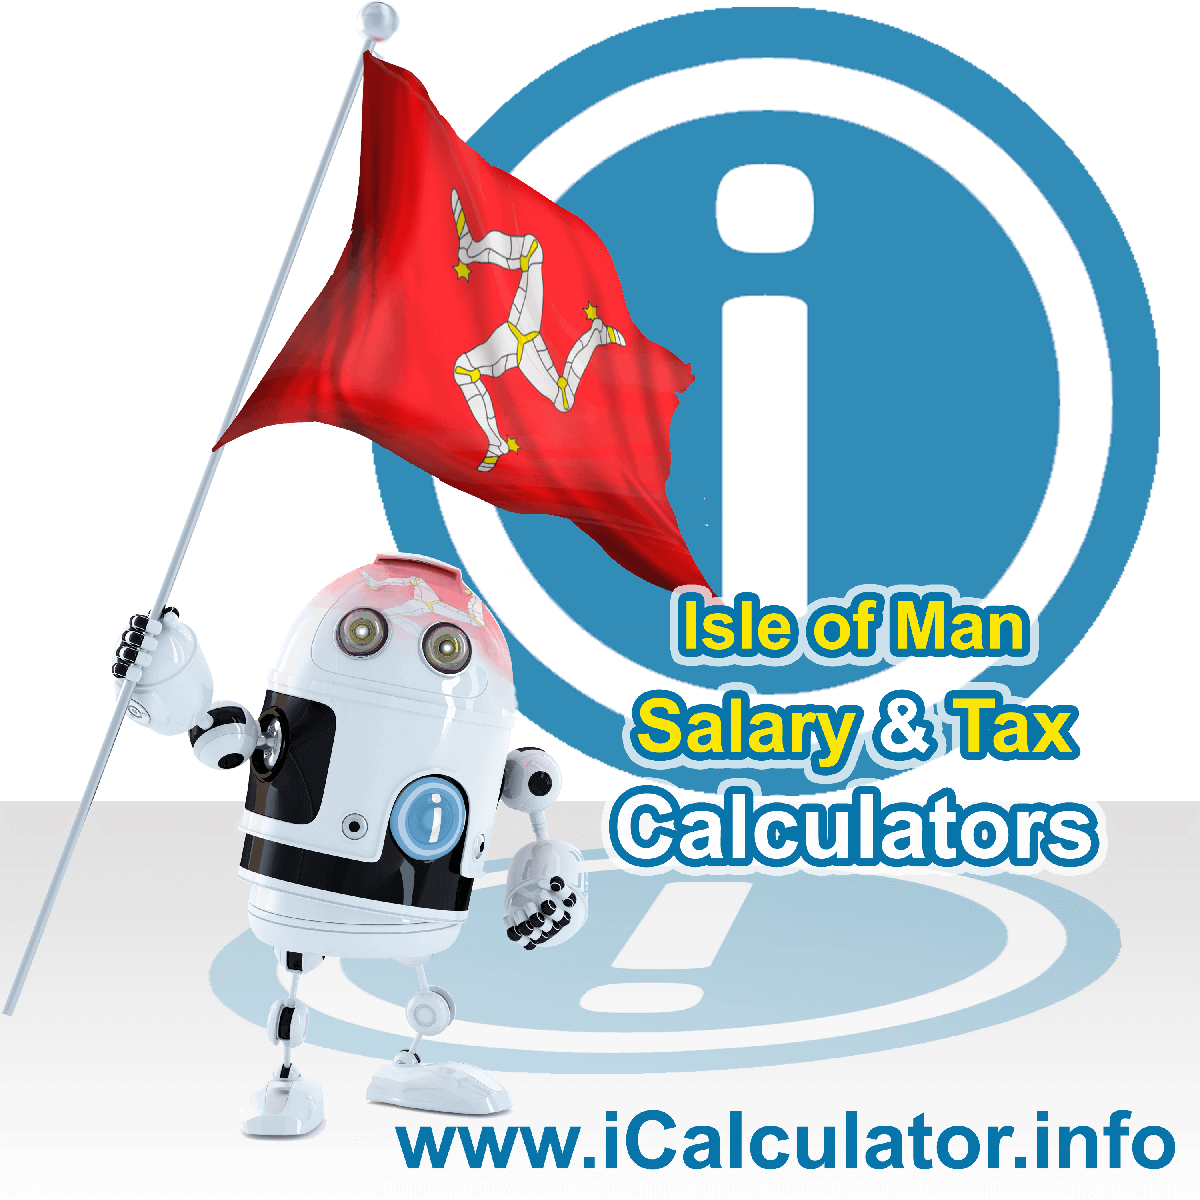 Isle Of Man Tax Calculator. This image shows the Isle Of Man flag and information relating to the tax formula for the Isle Of Man Salary Calculator